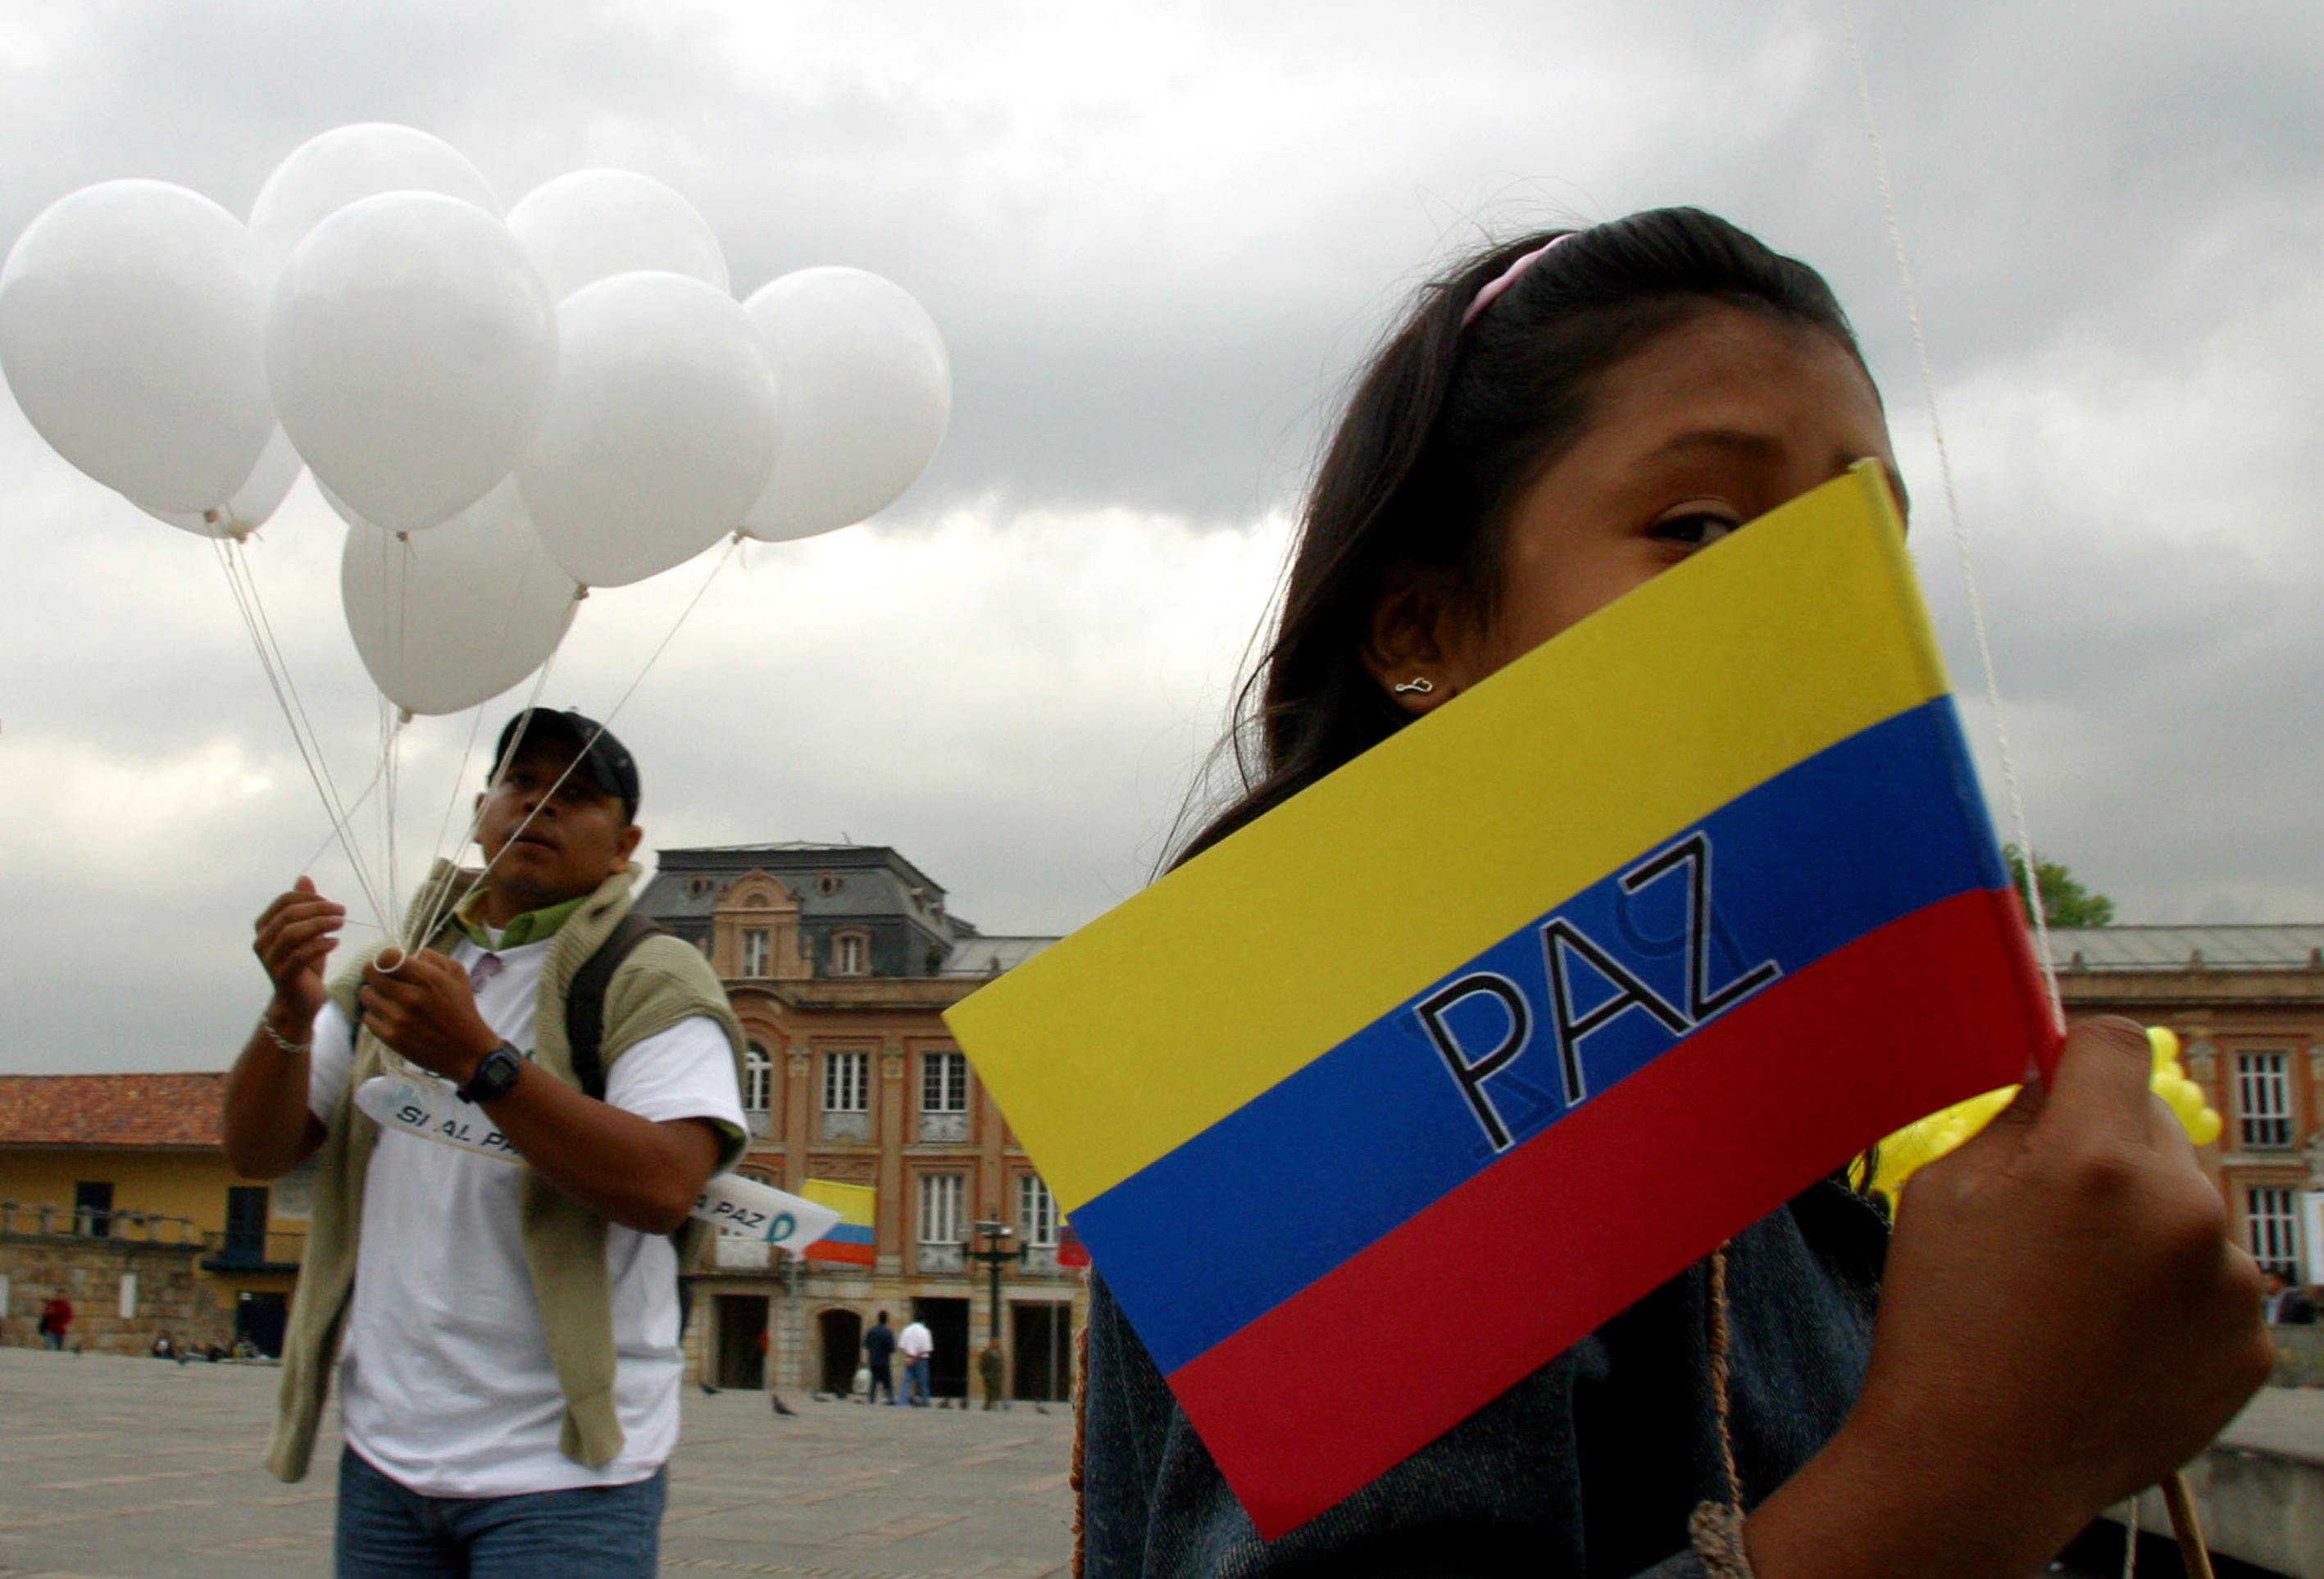 A young girl holds a Colombian flag that reads "Peace" in front of the Congress building where Salvatore Mancusso, paramilitary leader of the supreme commander of the United Self-Defense Forces was speakingM Wednesday, July 28, 2004 in Bogota, Wednesday, July 28, 2004. Mancuso addressed lawmakers for the first time about the peace process between the AUC and the Colombian government. (Scott Dalton/The New York Times) 